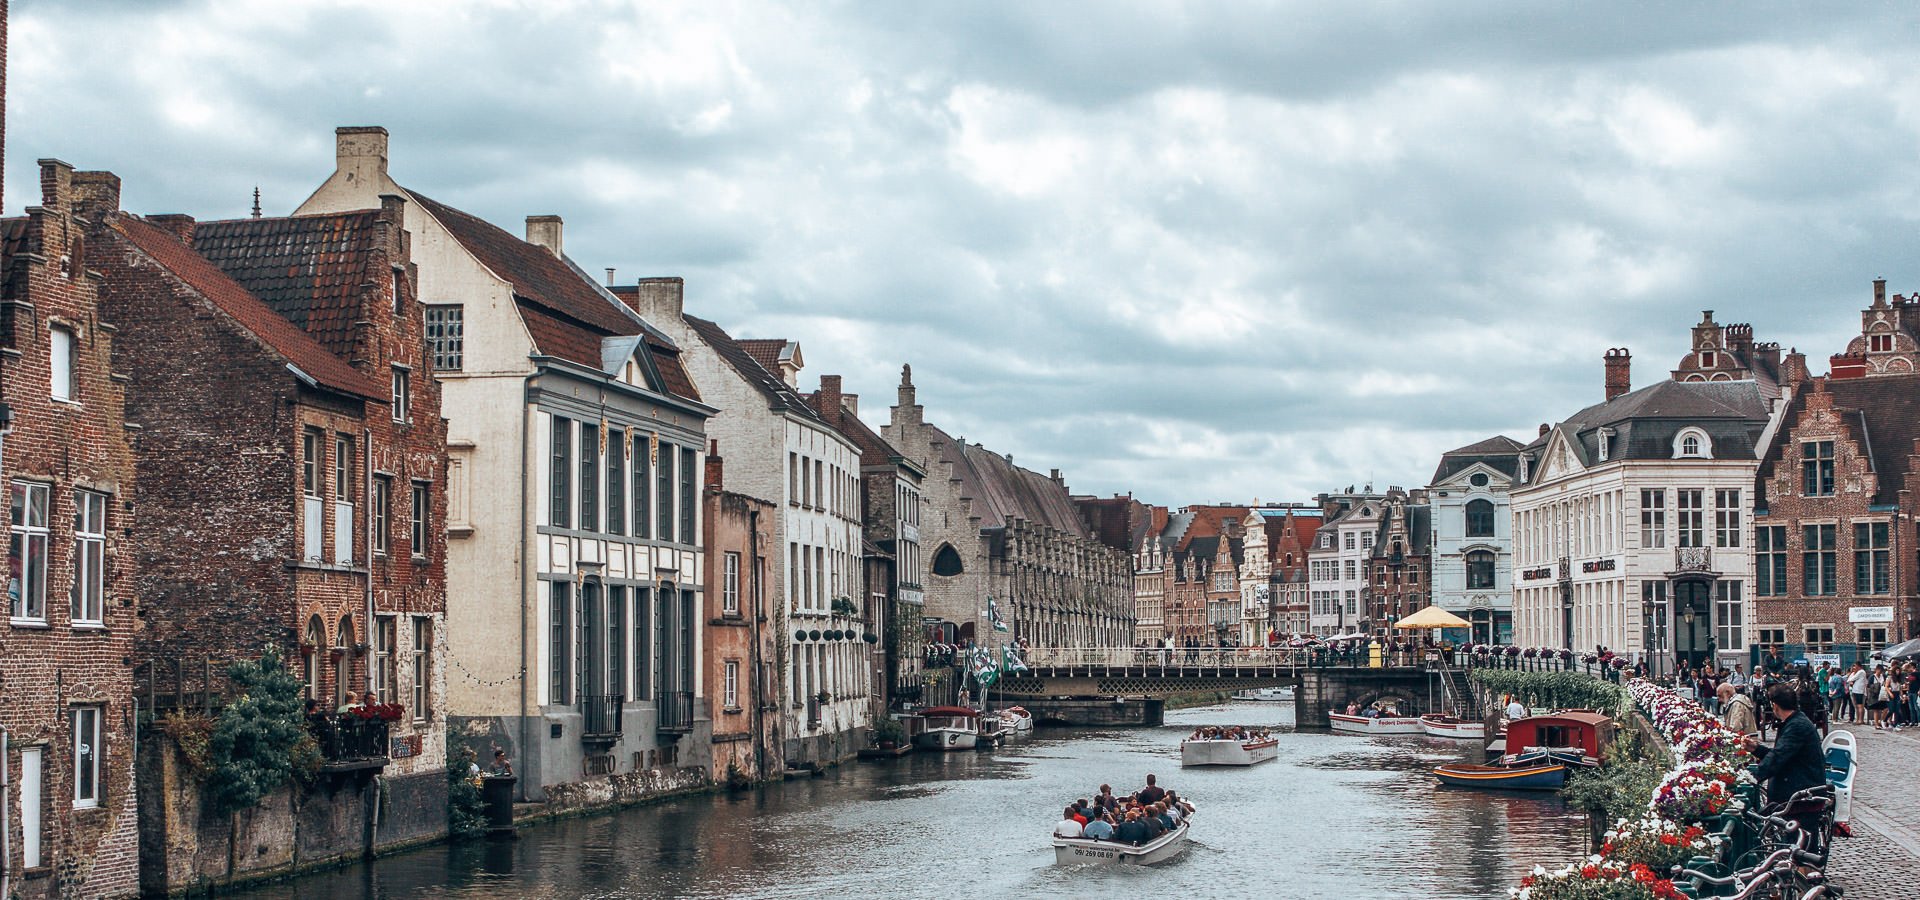 The Undiscovered Flemish Jewel: A Day Trip To Ghent | 3 days in lisbon 6